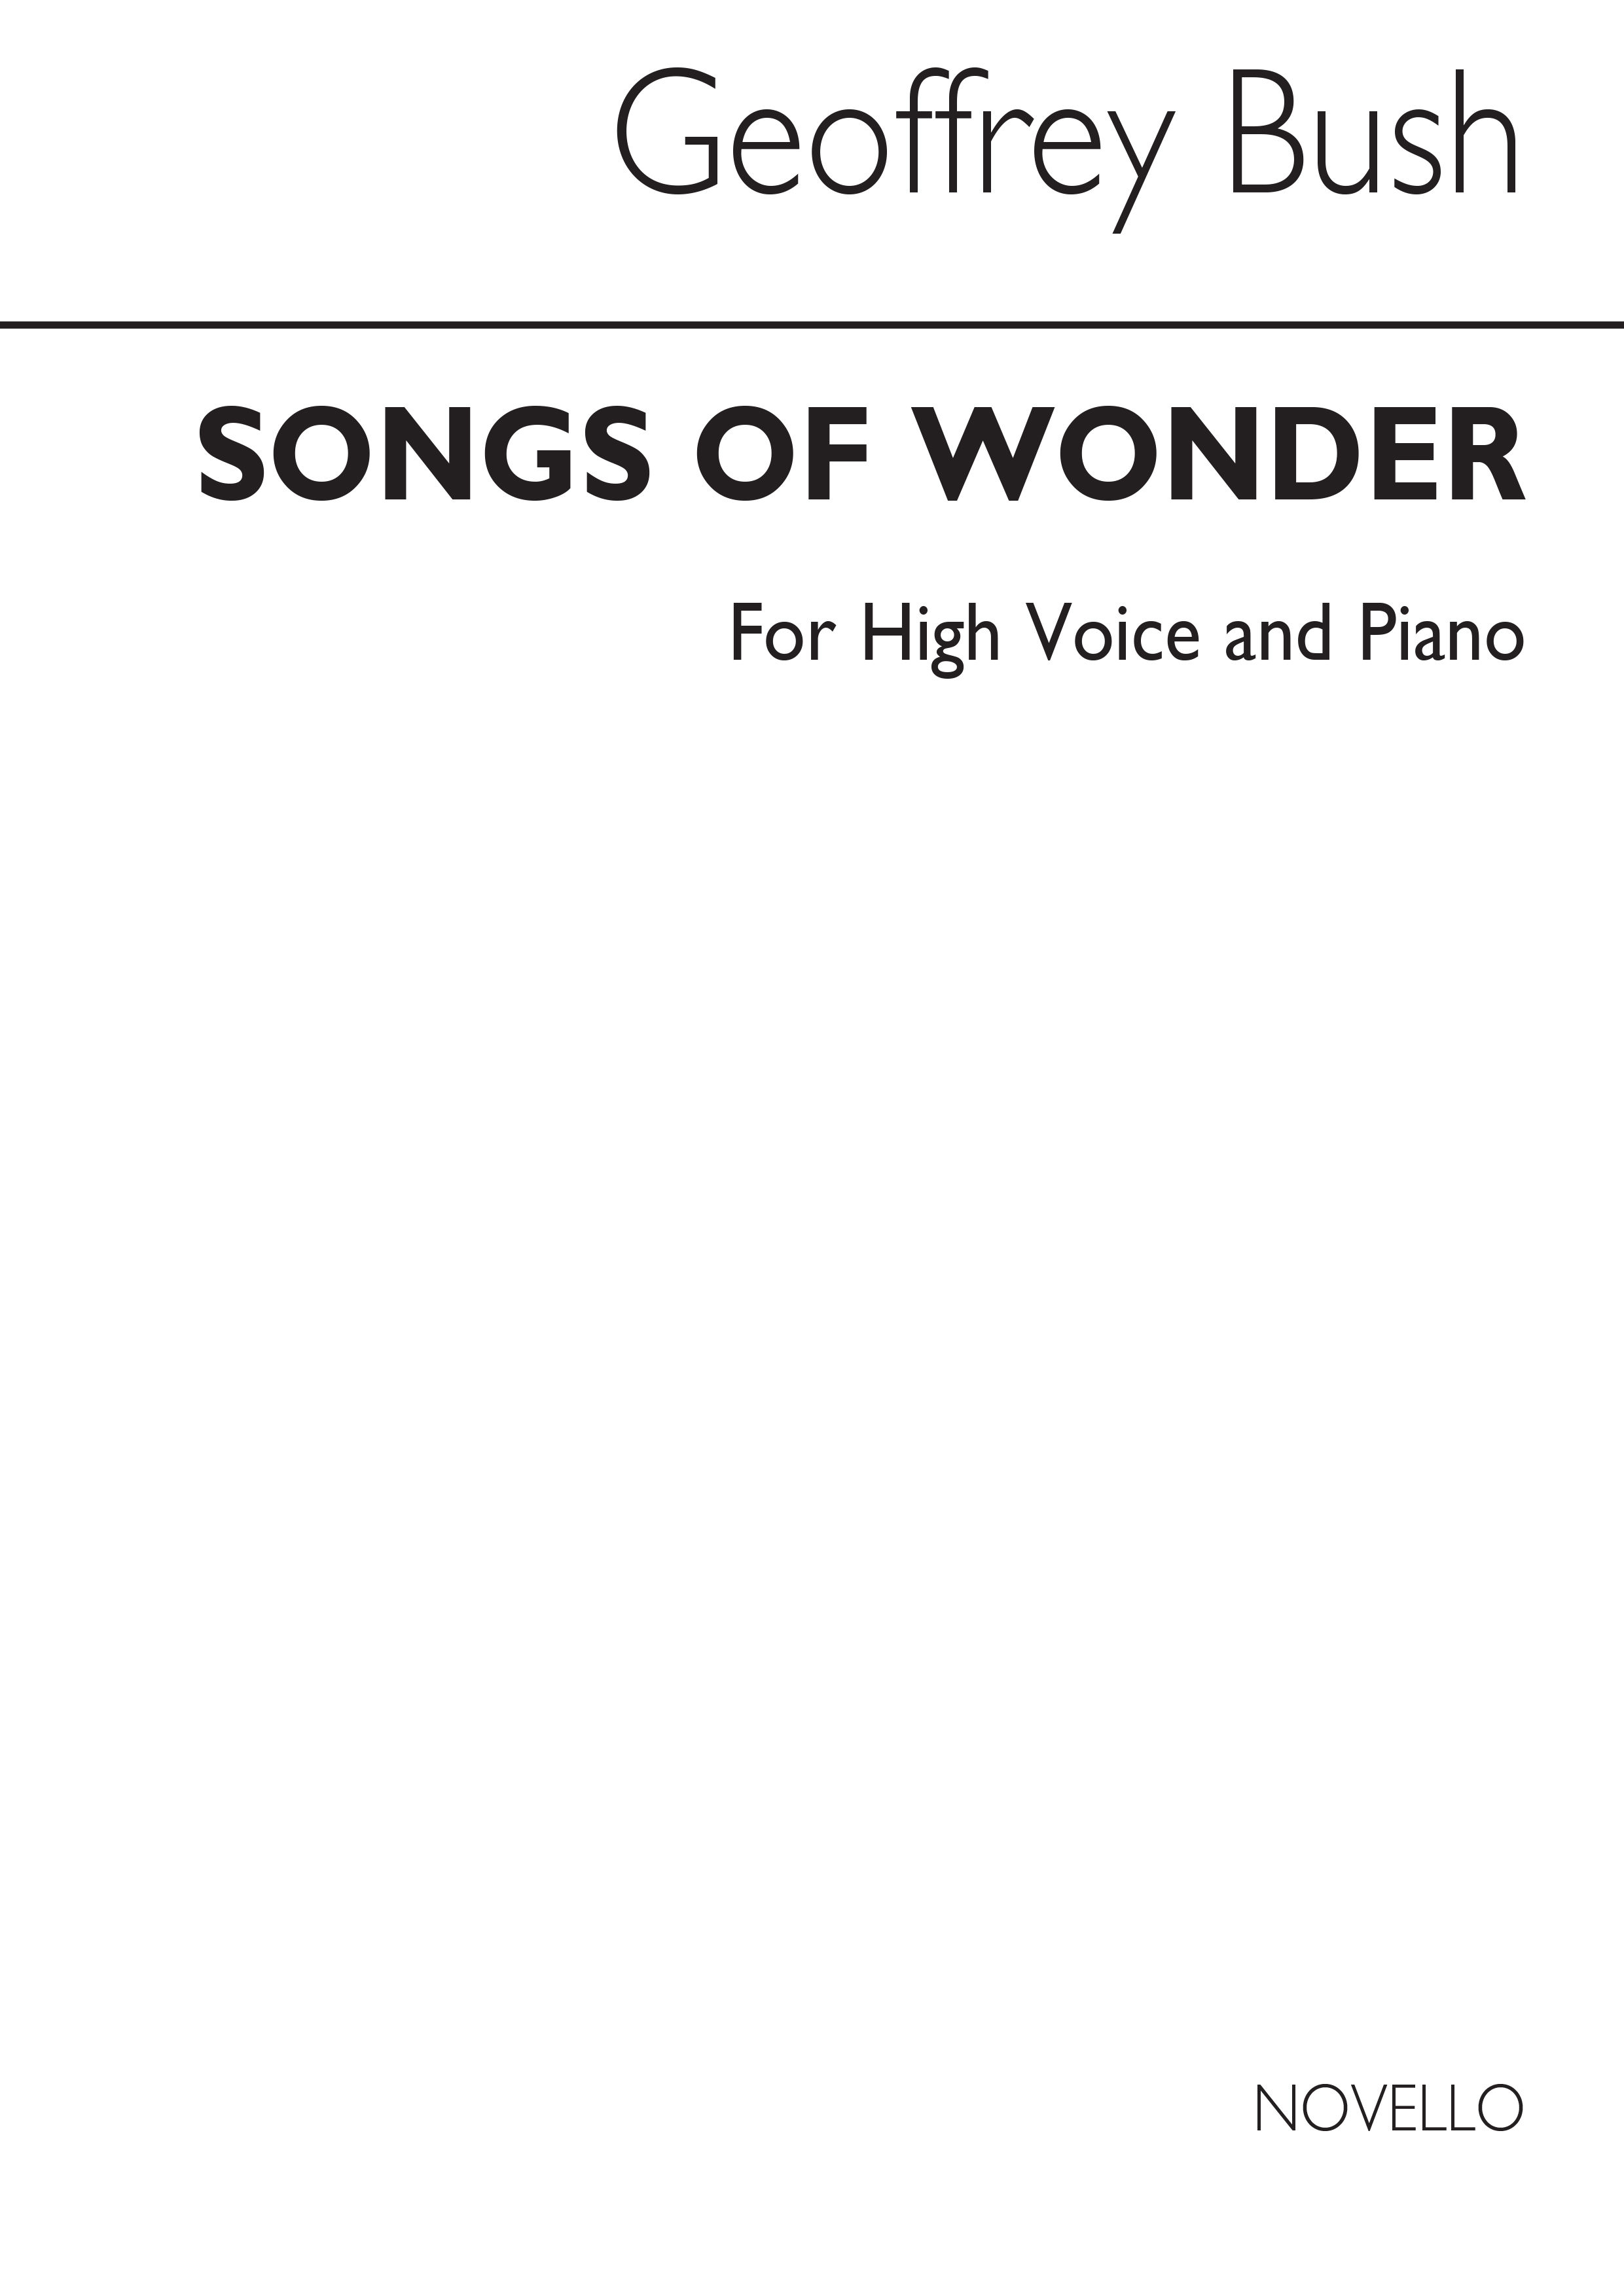 Geoffrey Bush: Songs Of Wonder for High Voice and Piano